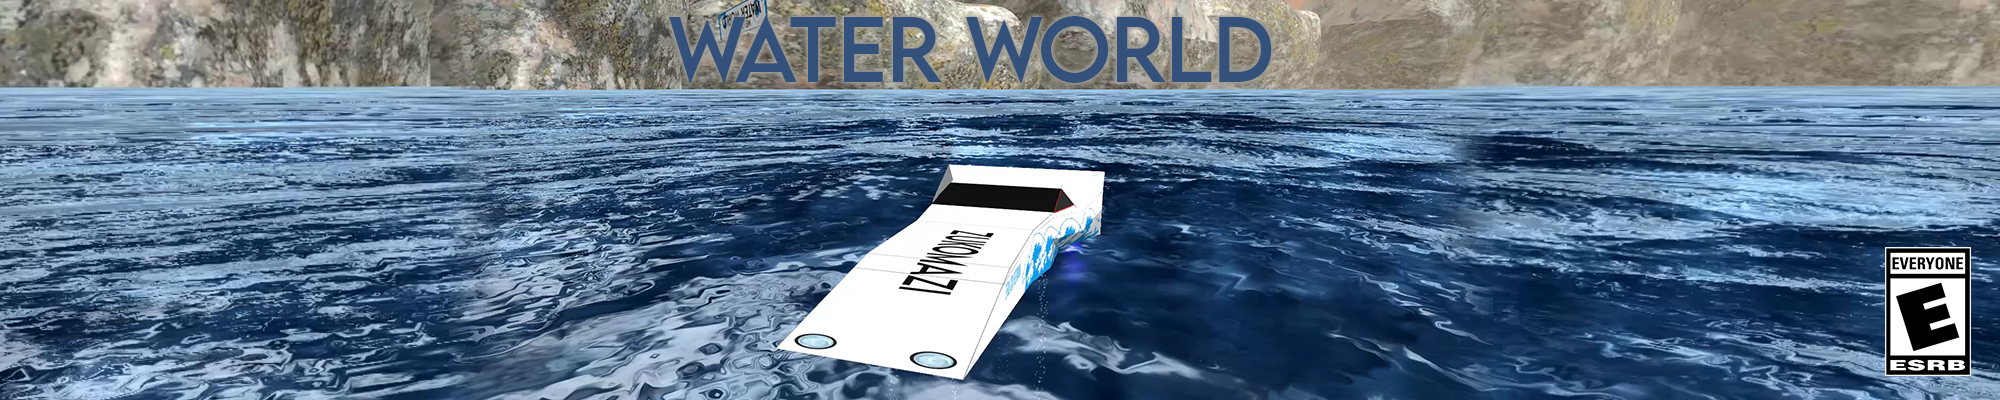 Water World - Boat Racing Game